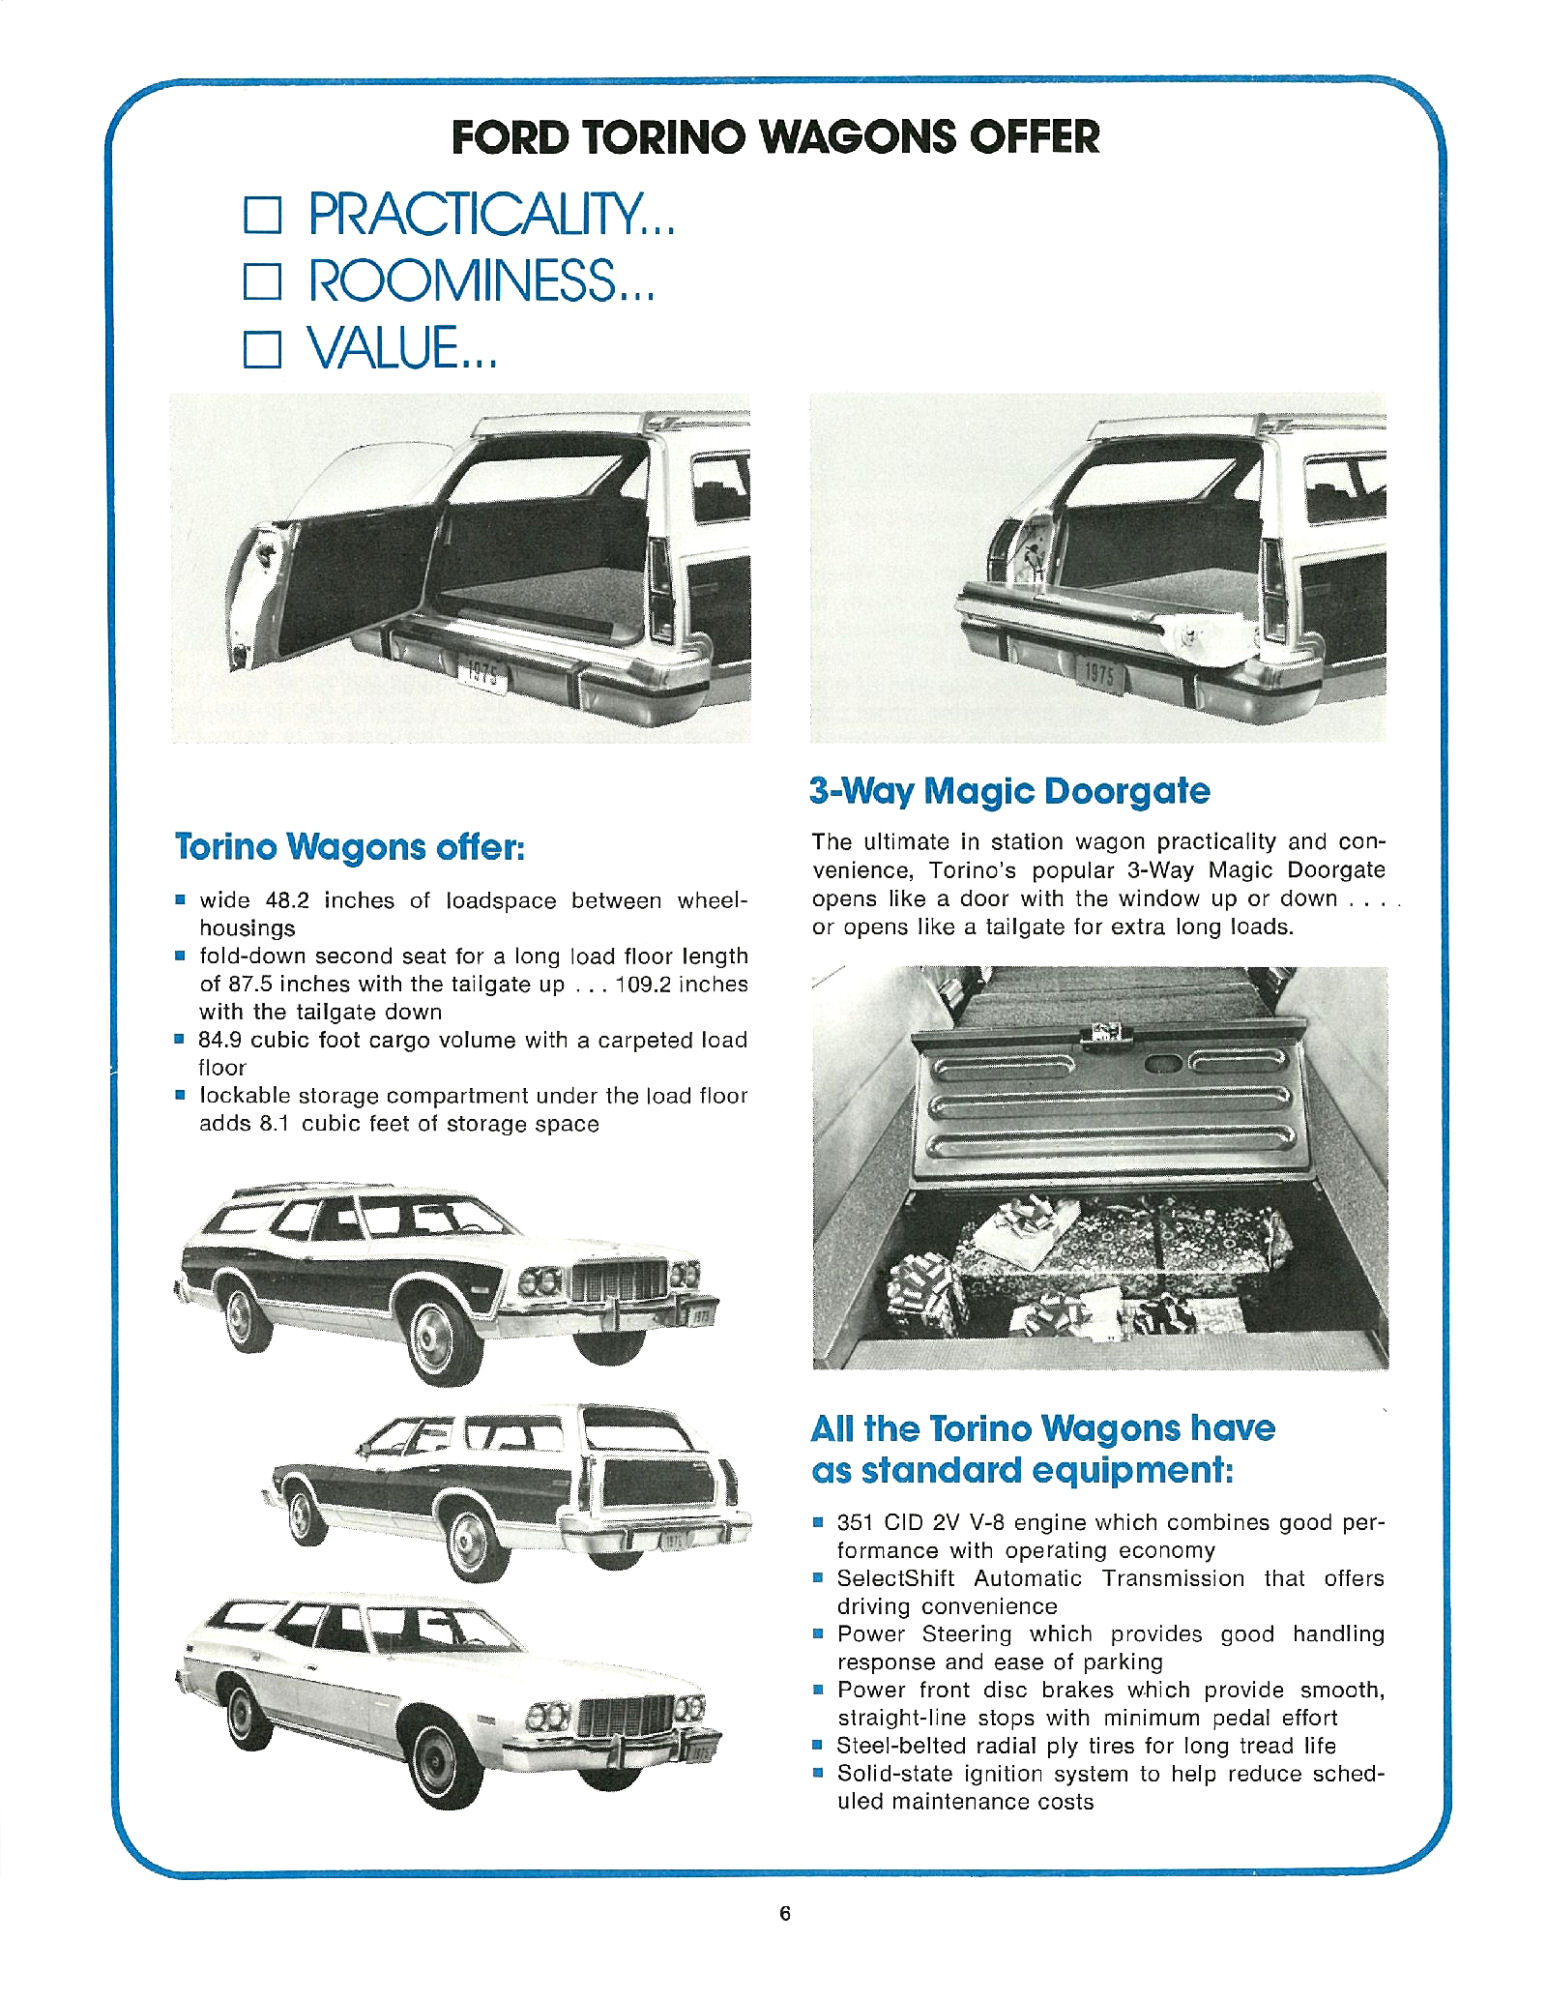 1975 Ford Torino Car Facts-06